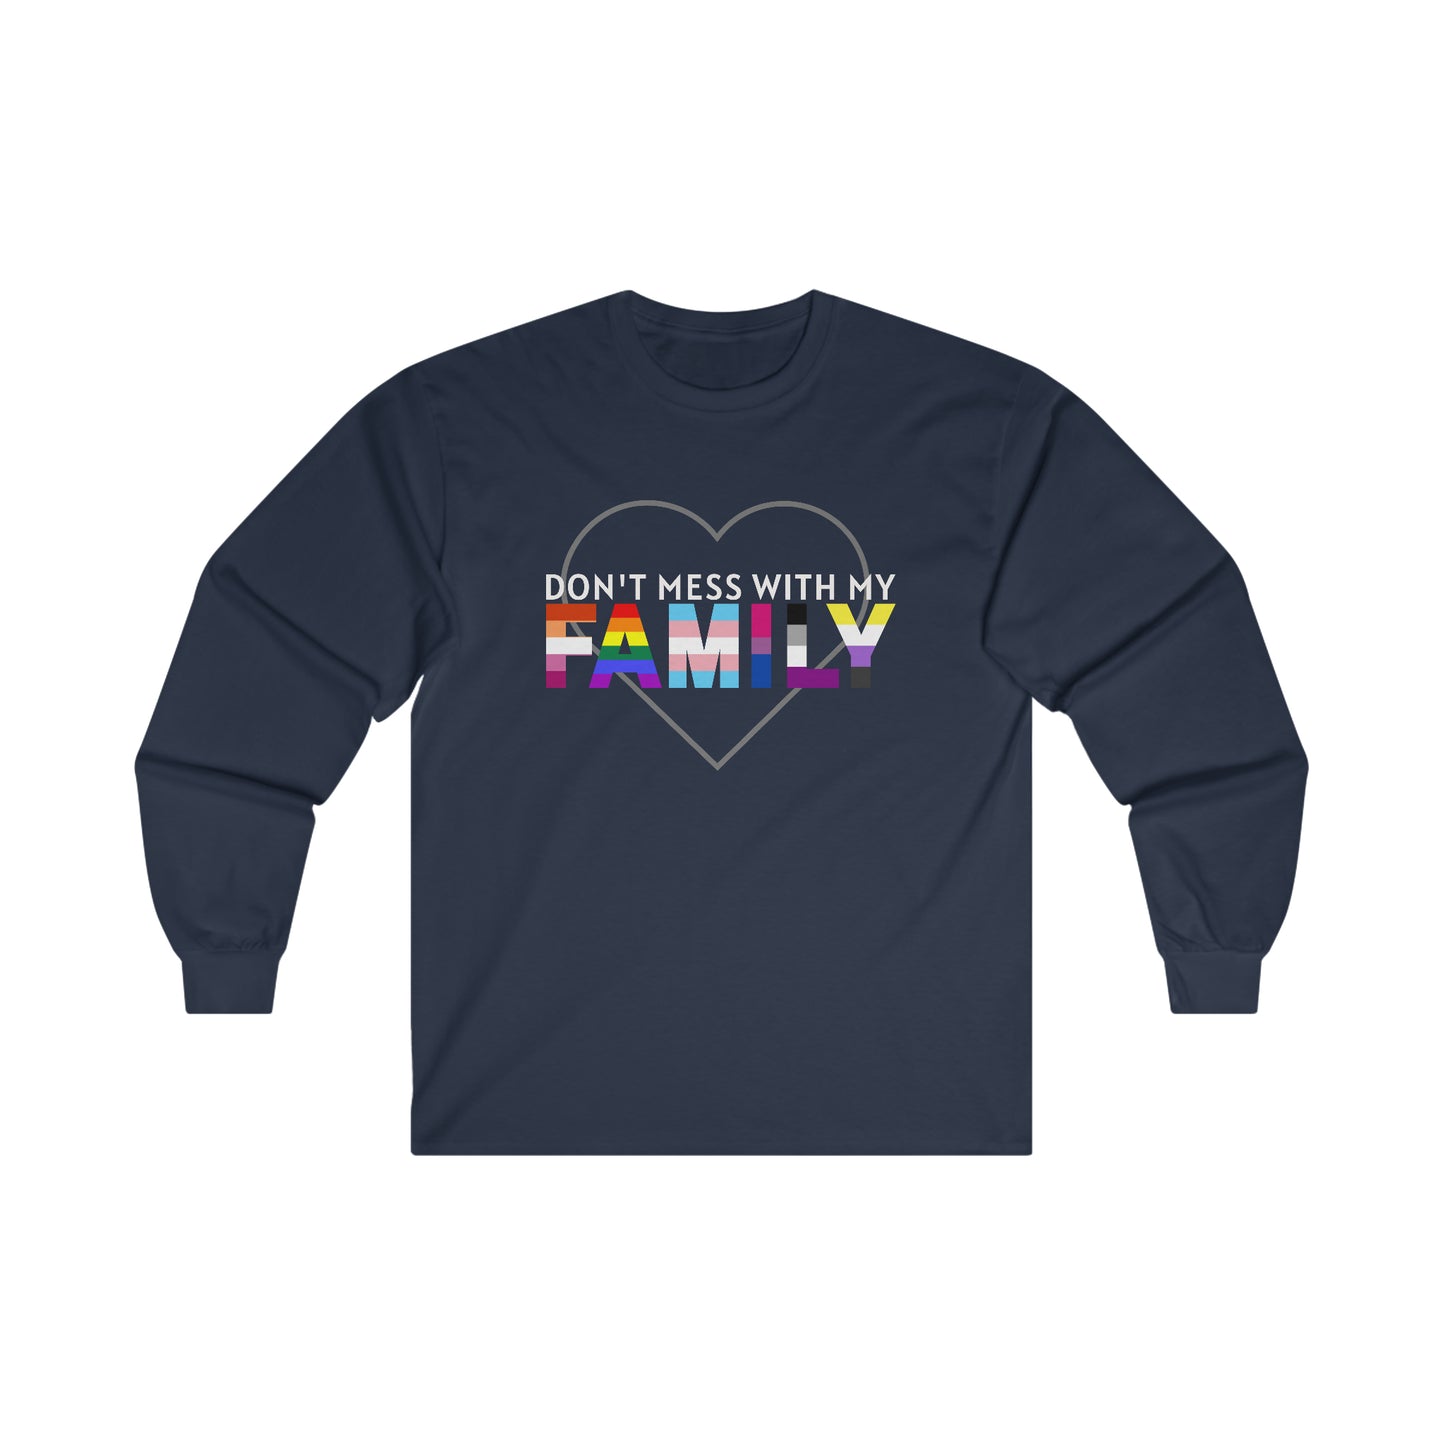 Don't Mess With My Family - Long Sleeve T-shirt